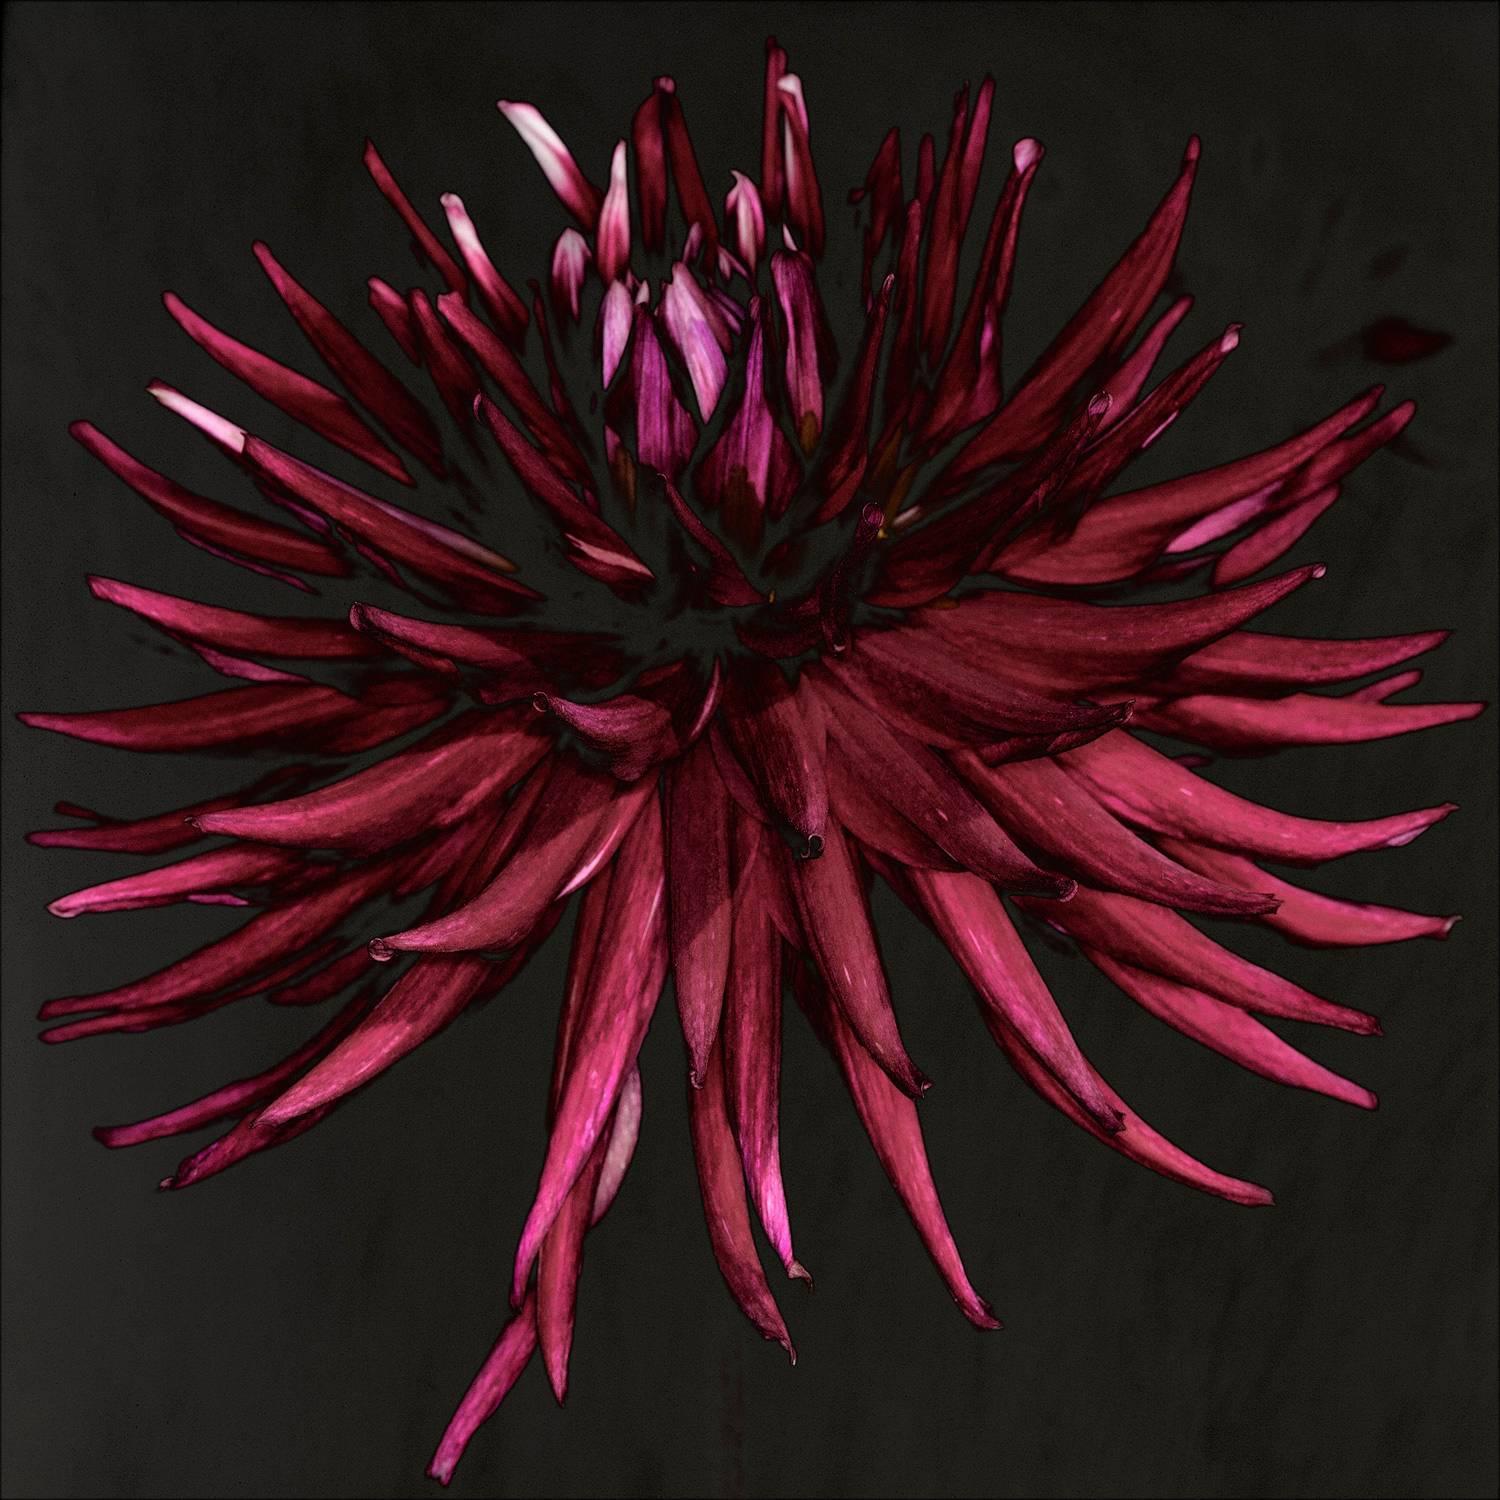 Star Dahlia - #2 of 5 - Photograph by Carsten Witte